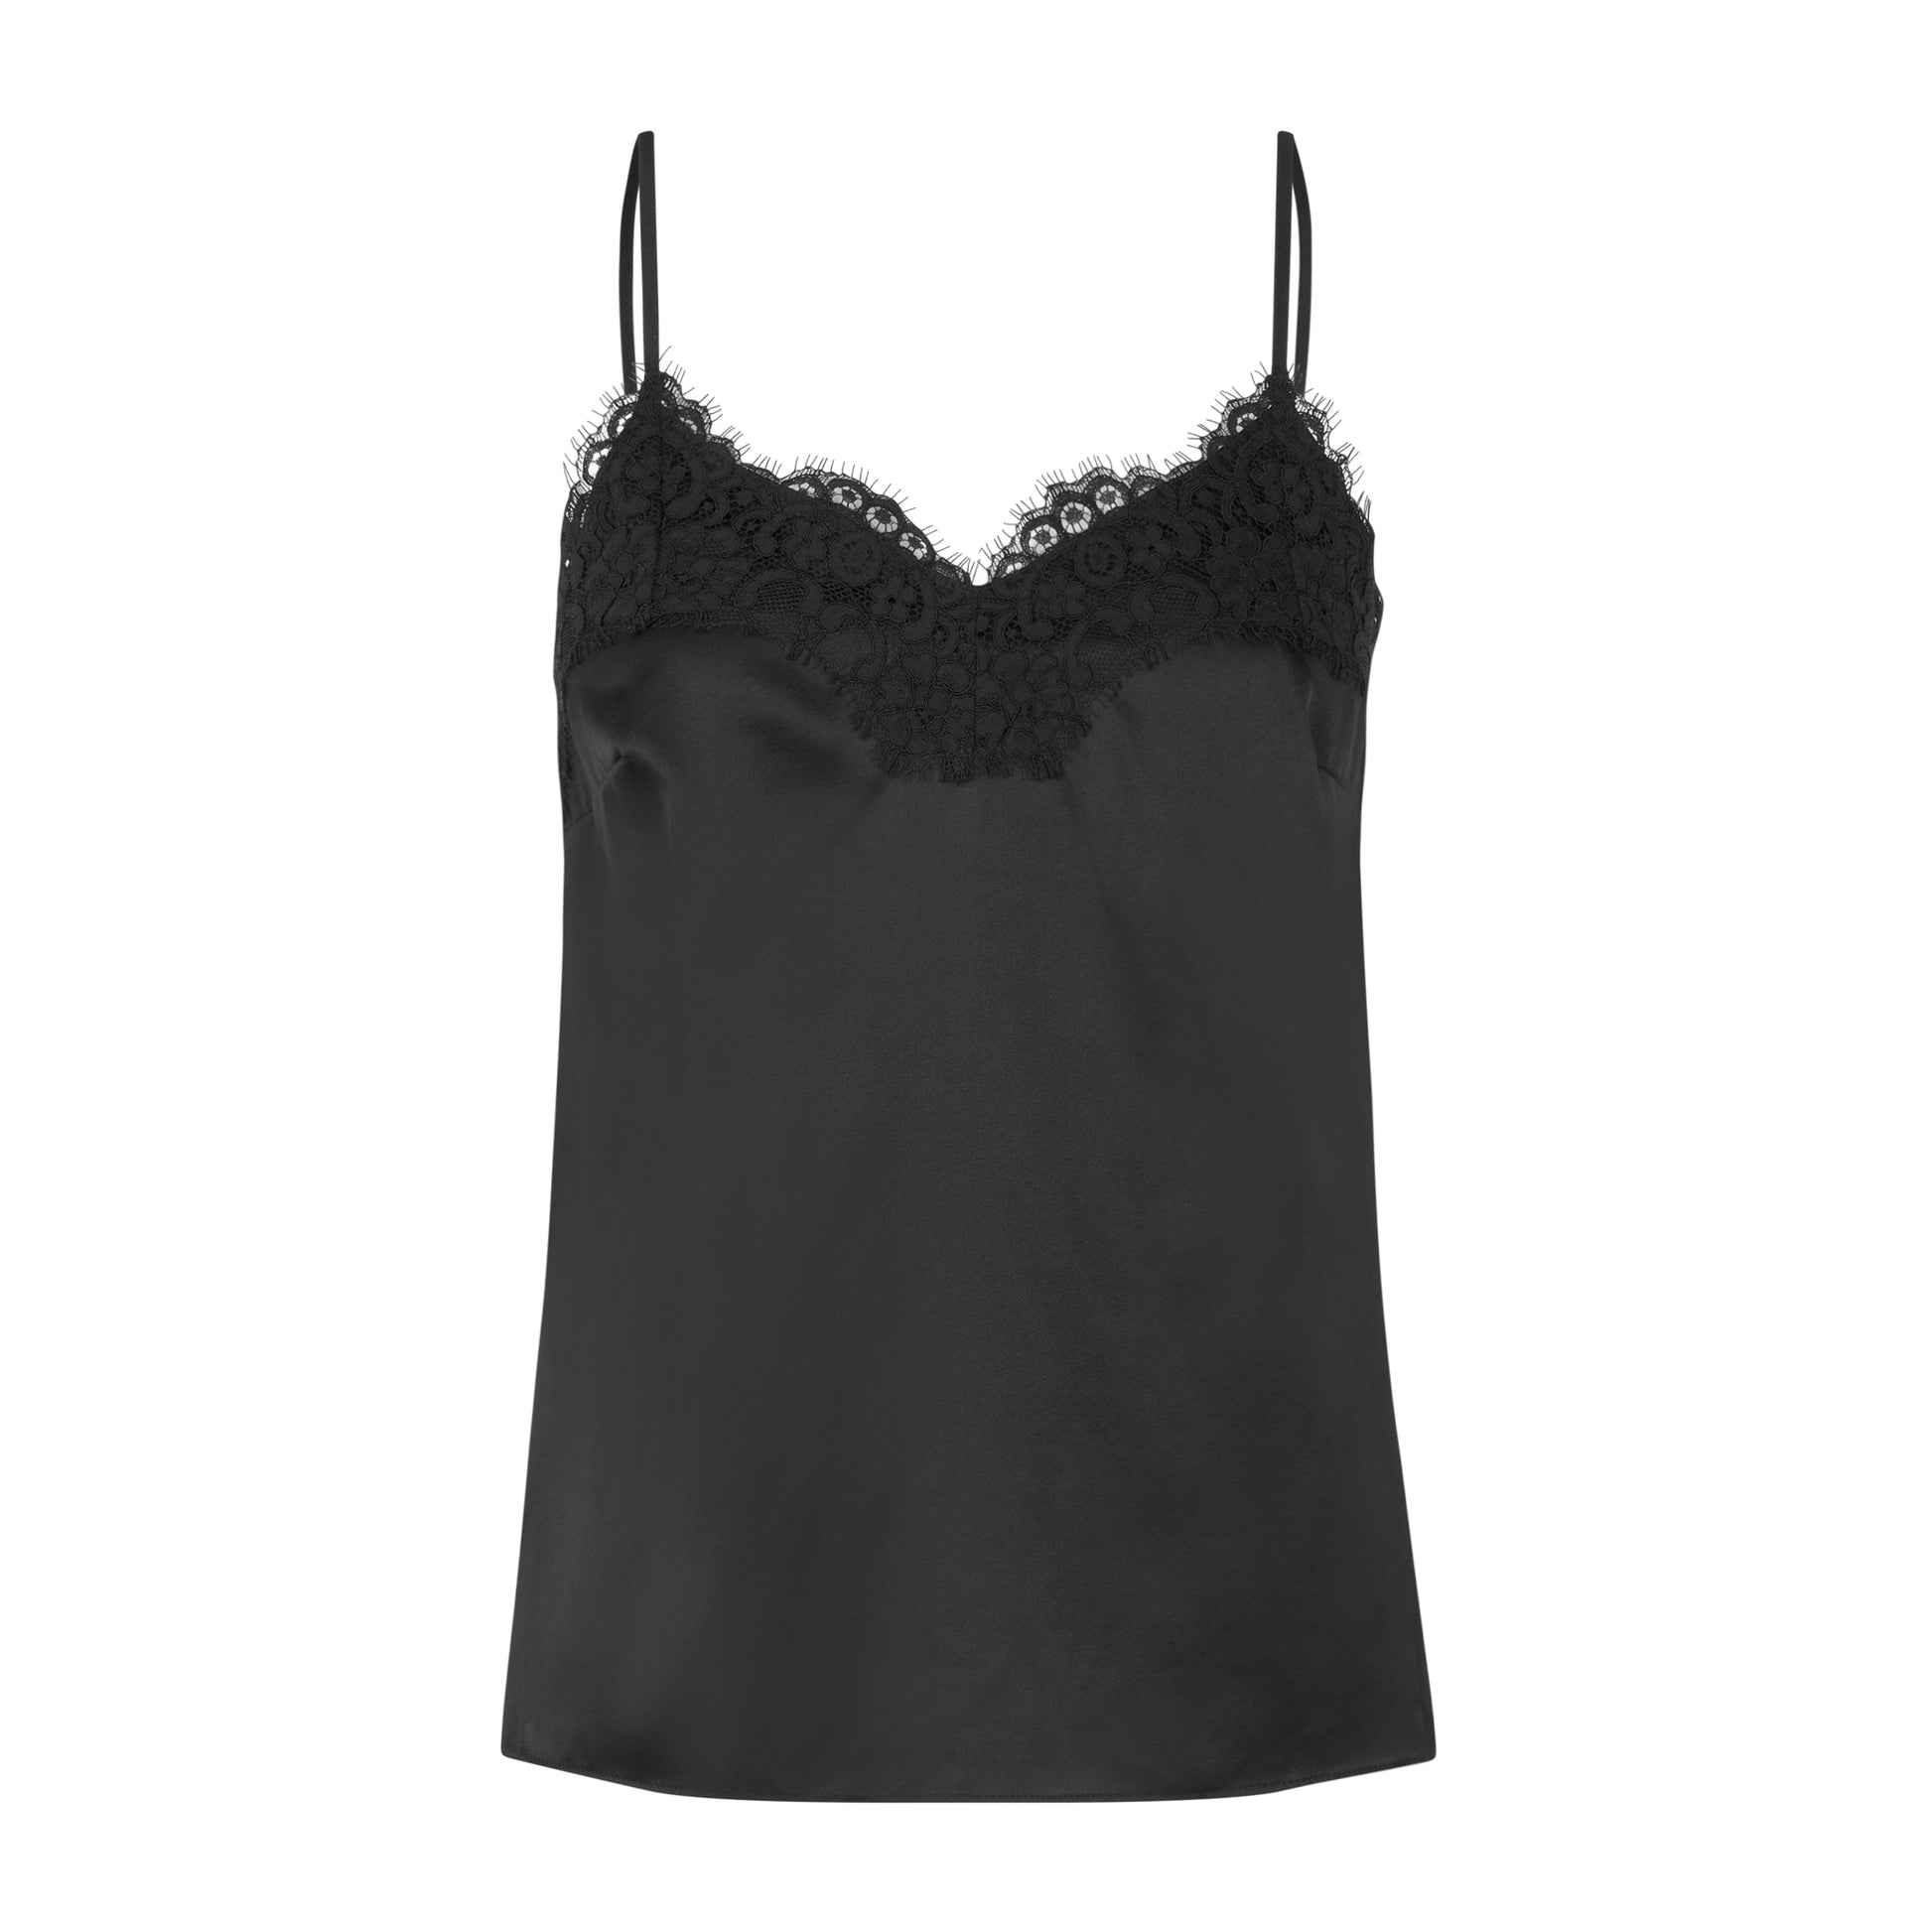 product shot of Rosemunde black silk top with skinny straps and a lace trim